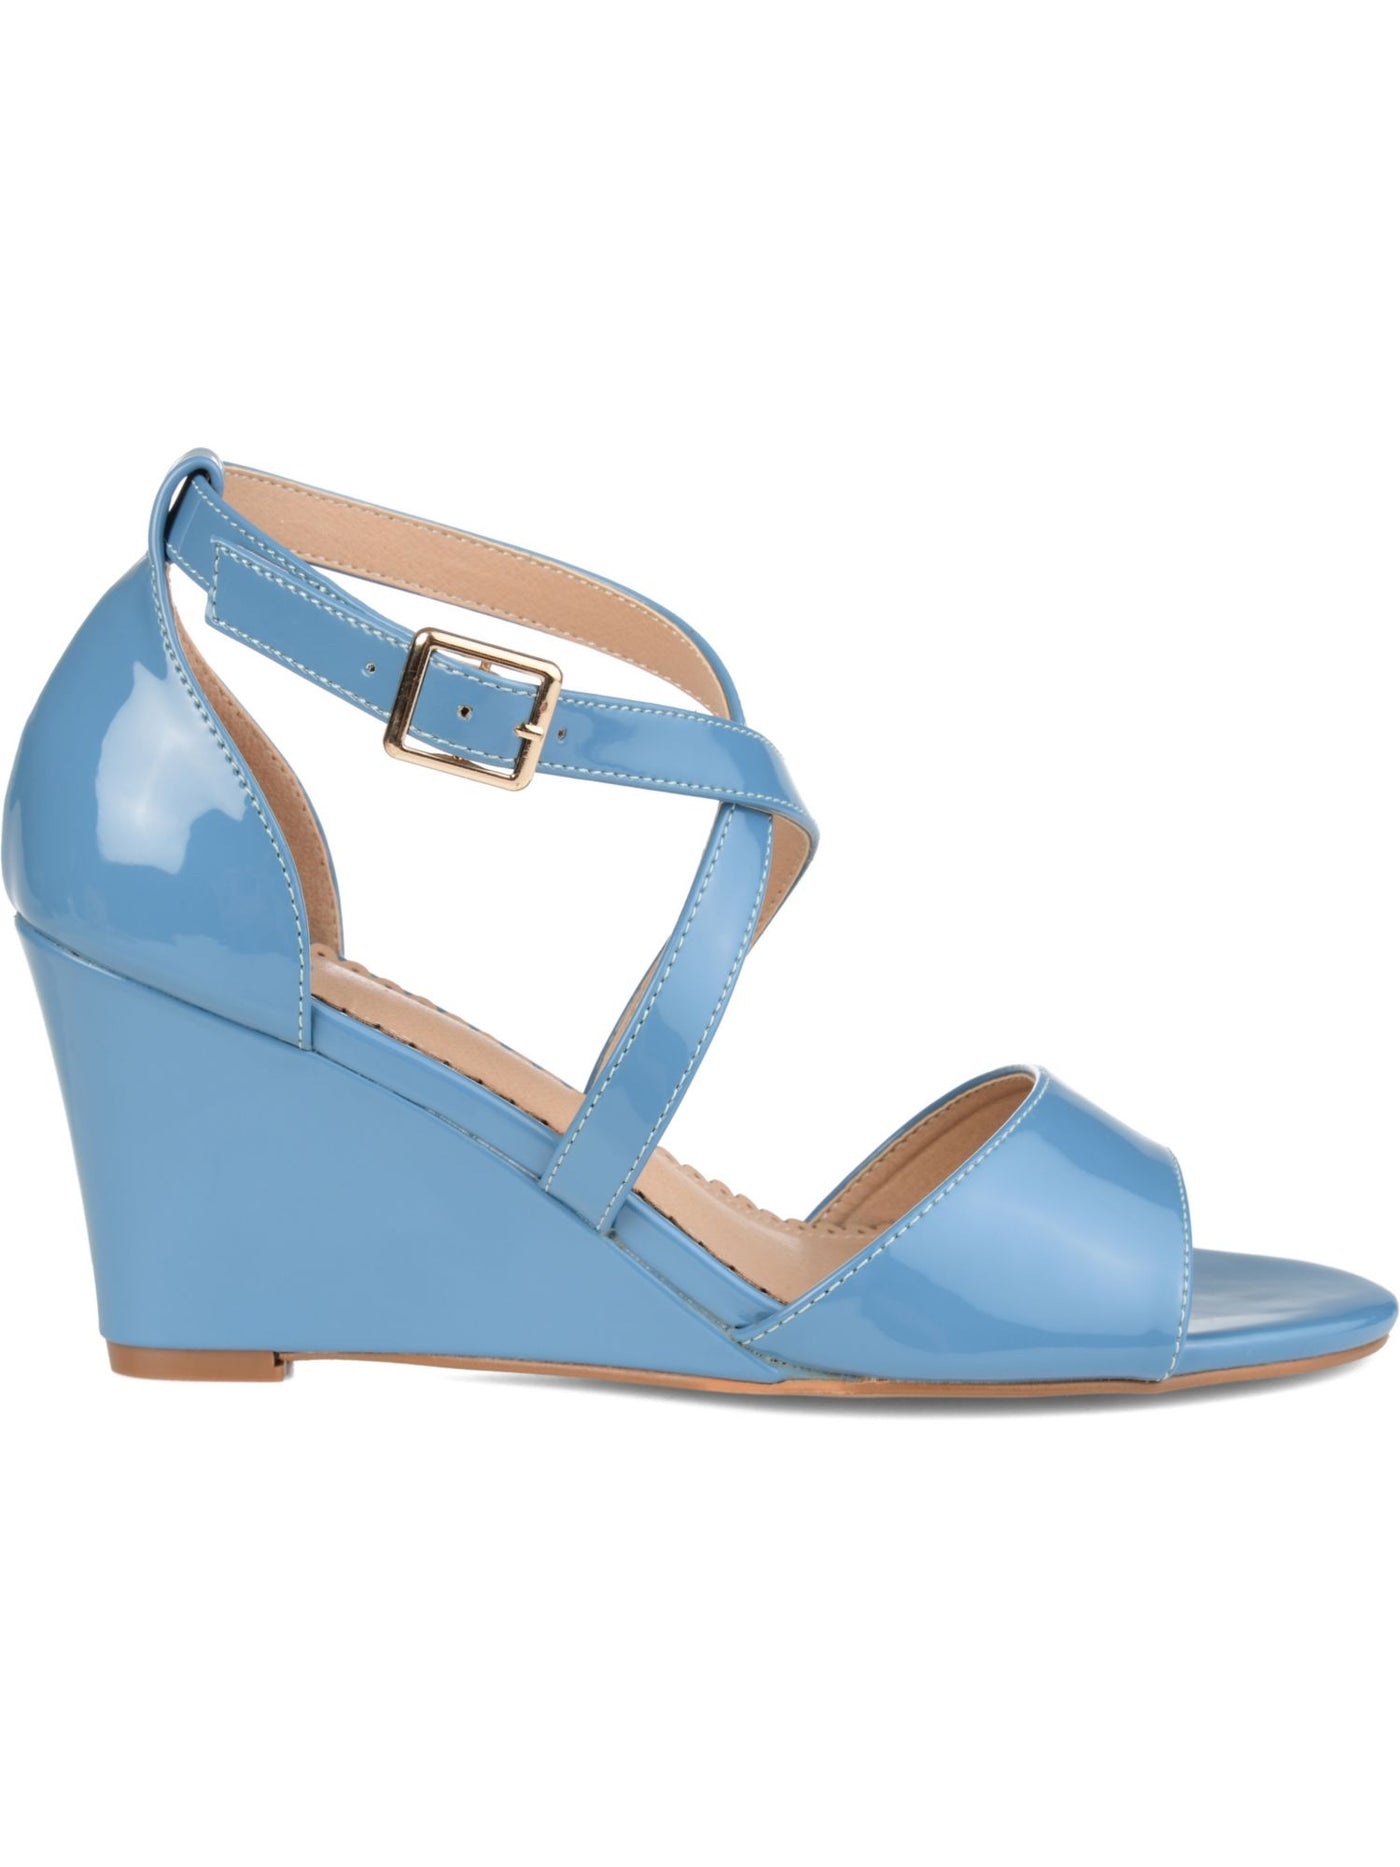 JOURNEE COLLECTION Womens Light Blue Crisscross Ankle Strap Adjustable Strap Adjustable Strap Comfort Stacey Open Toe Wedge Buckle Pumps Shoes 8.5 M